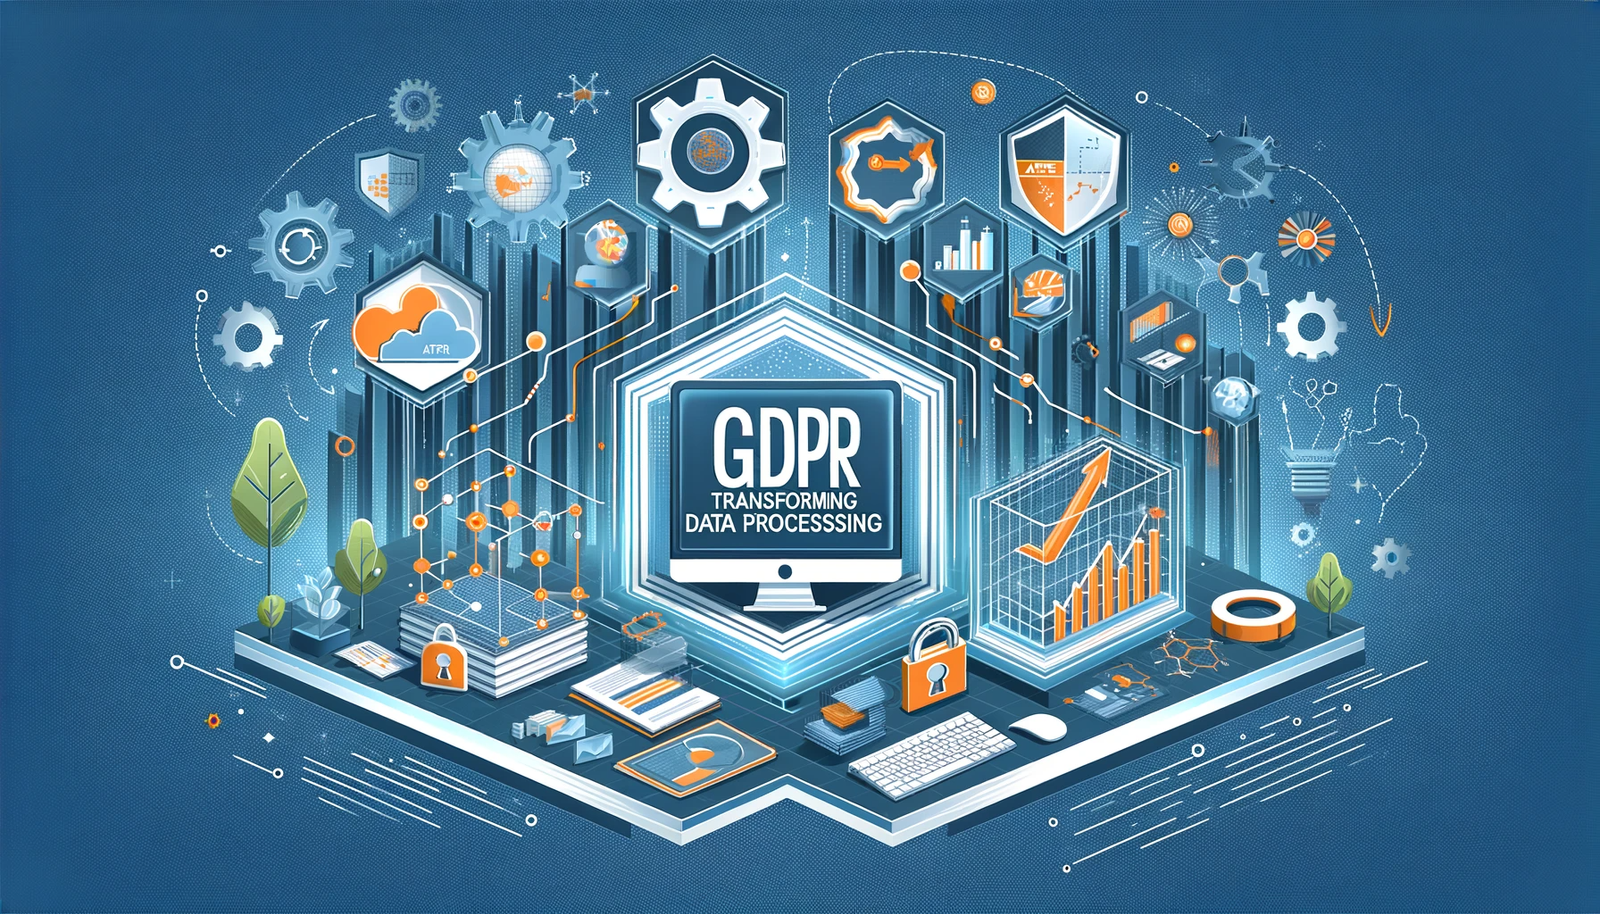 GDPR and Data Processing